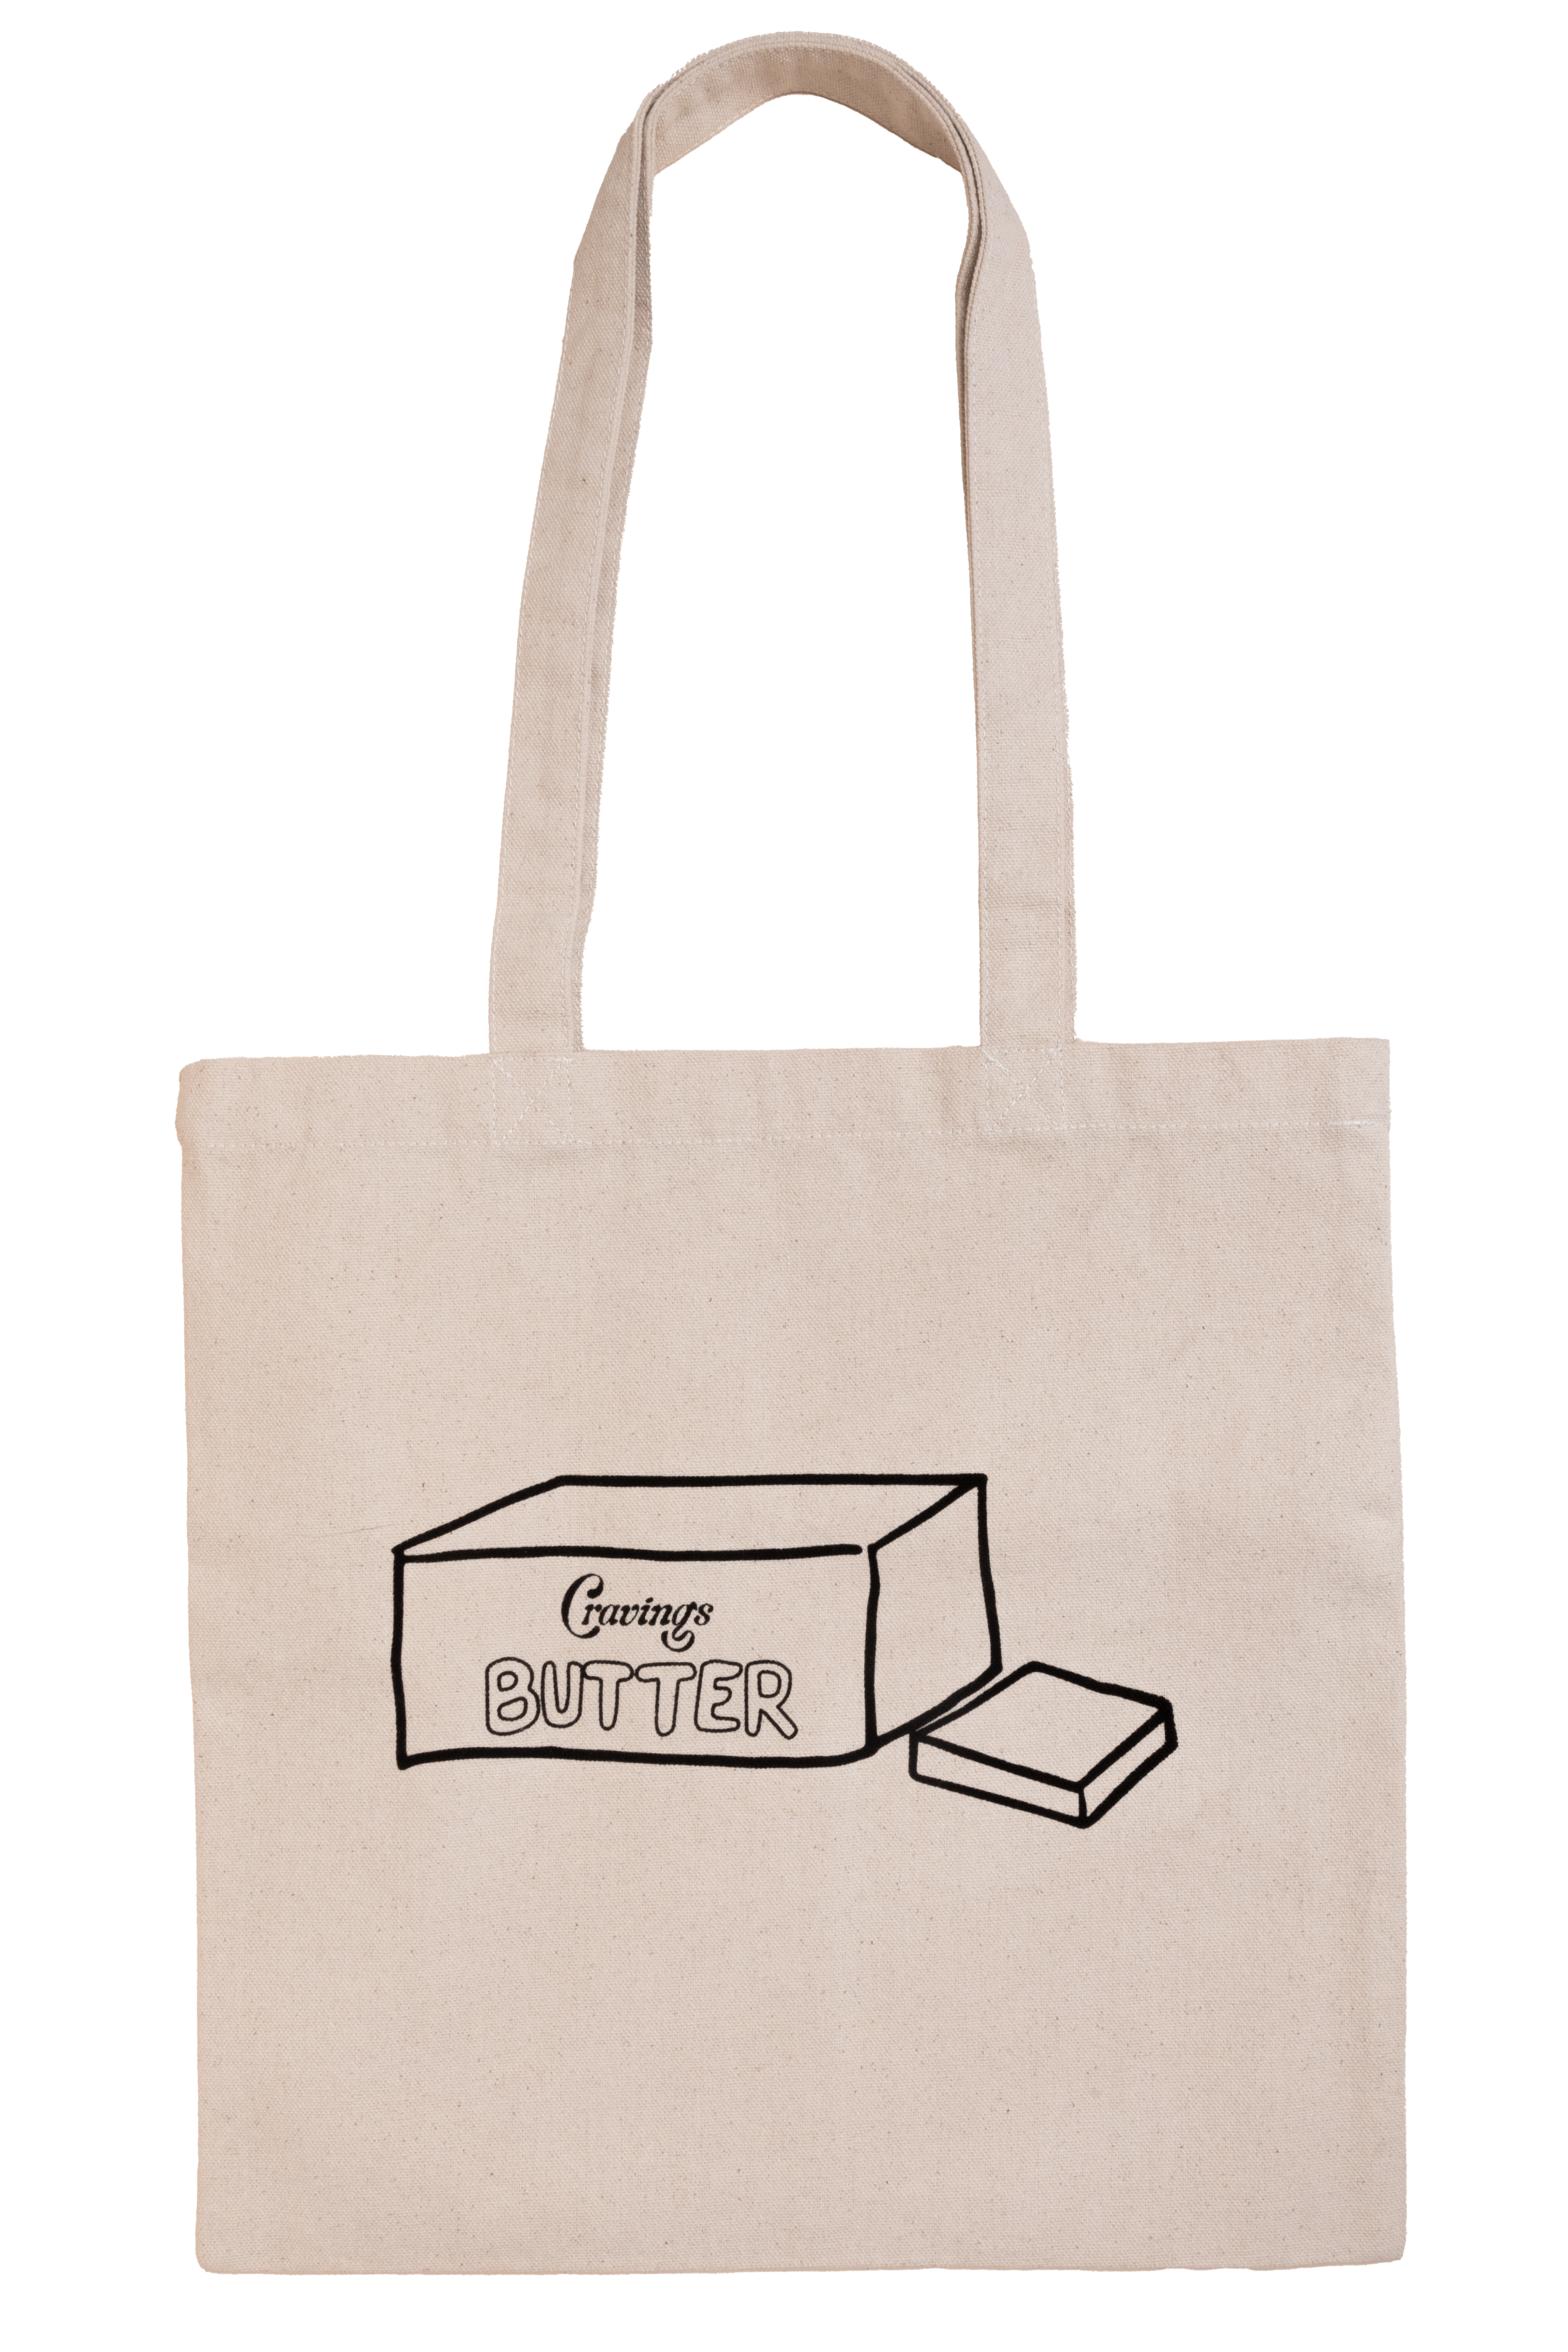 Butter Tote Bag